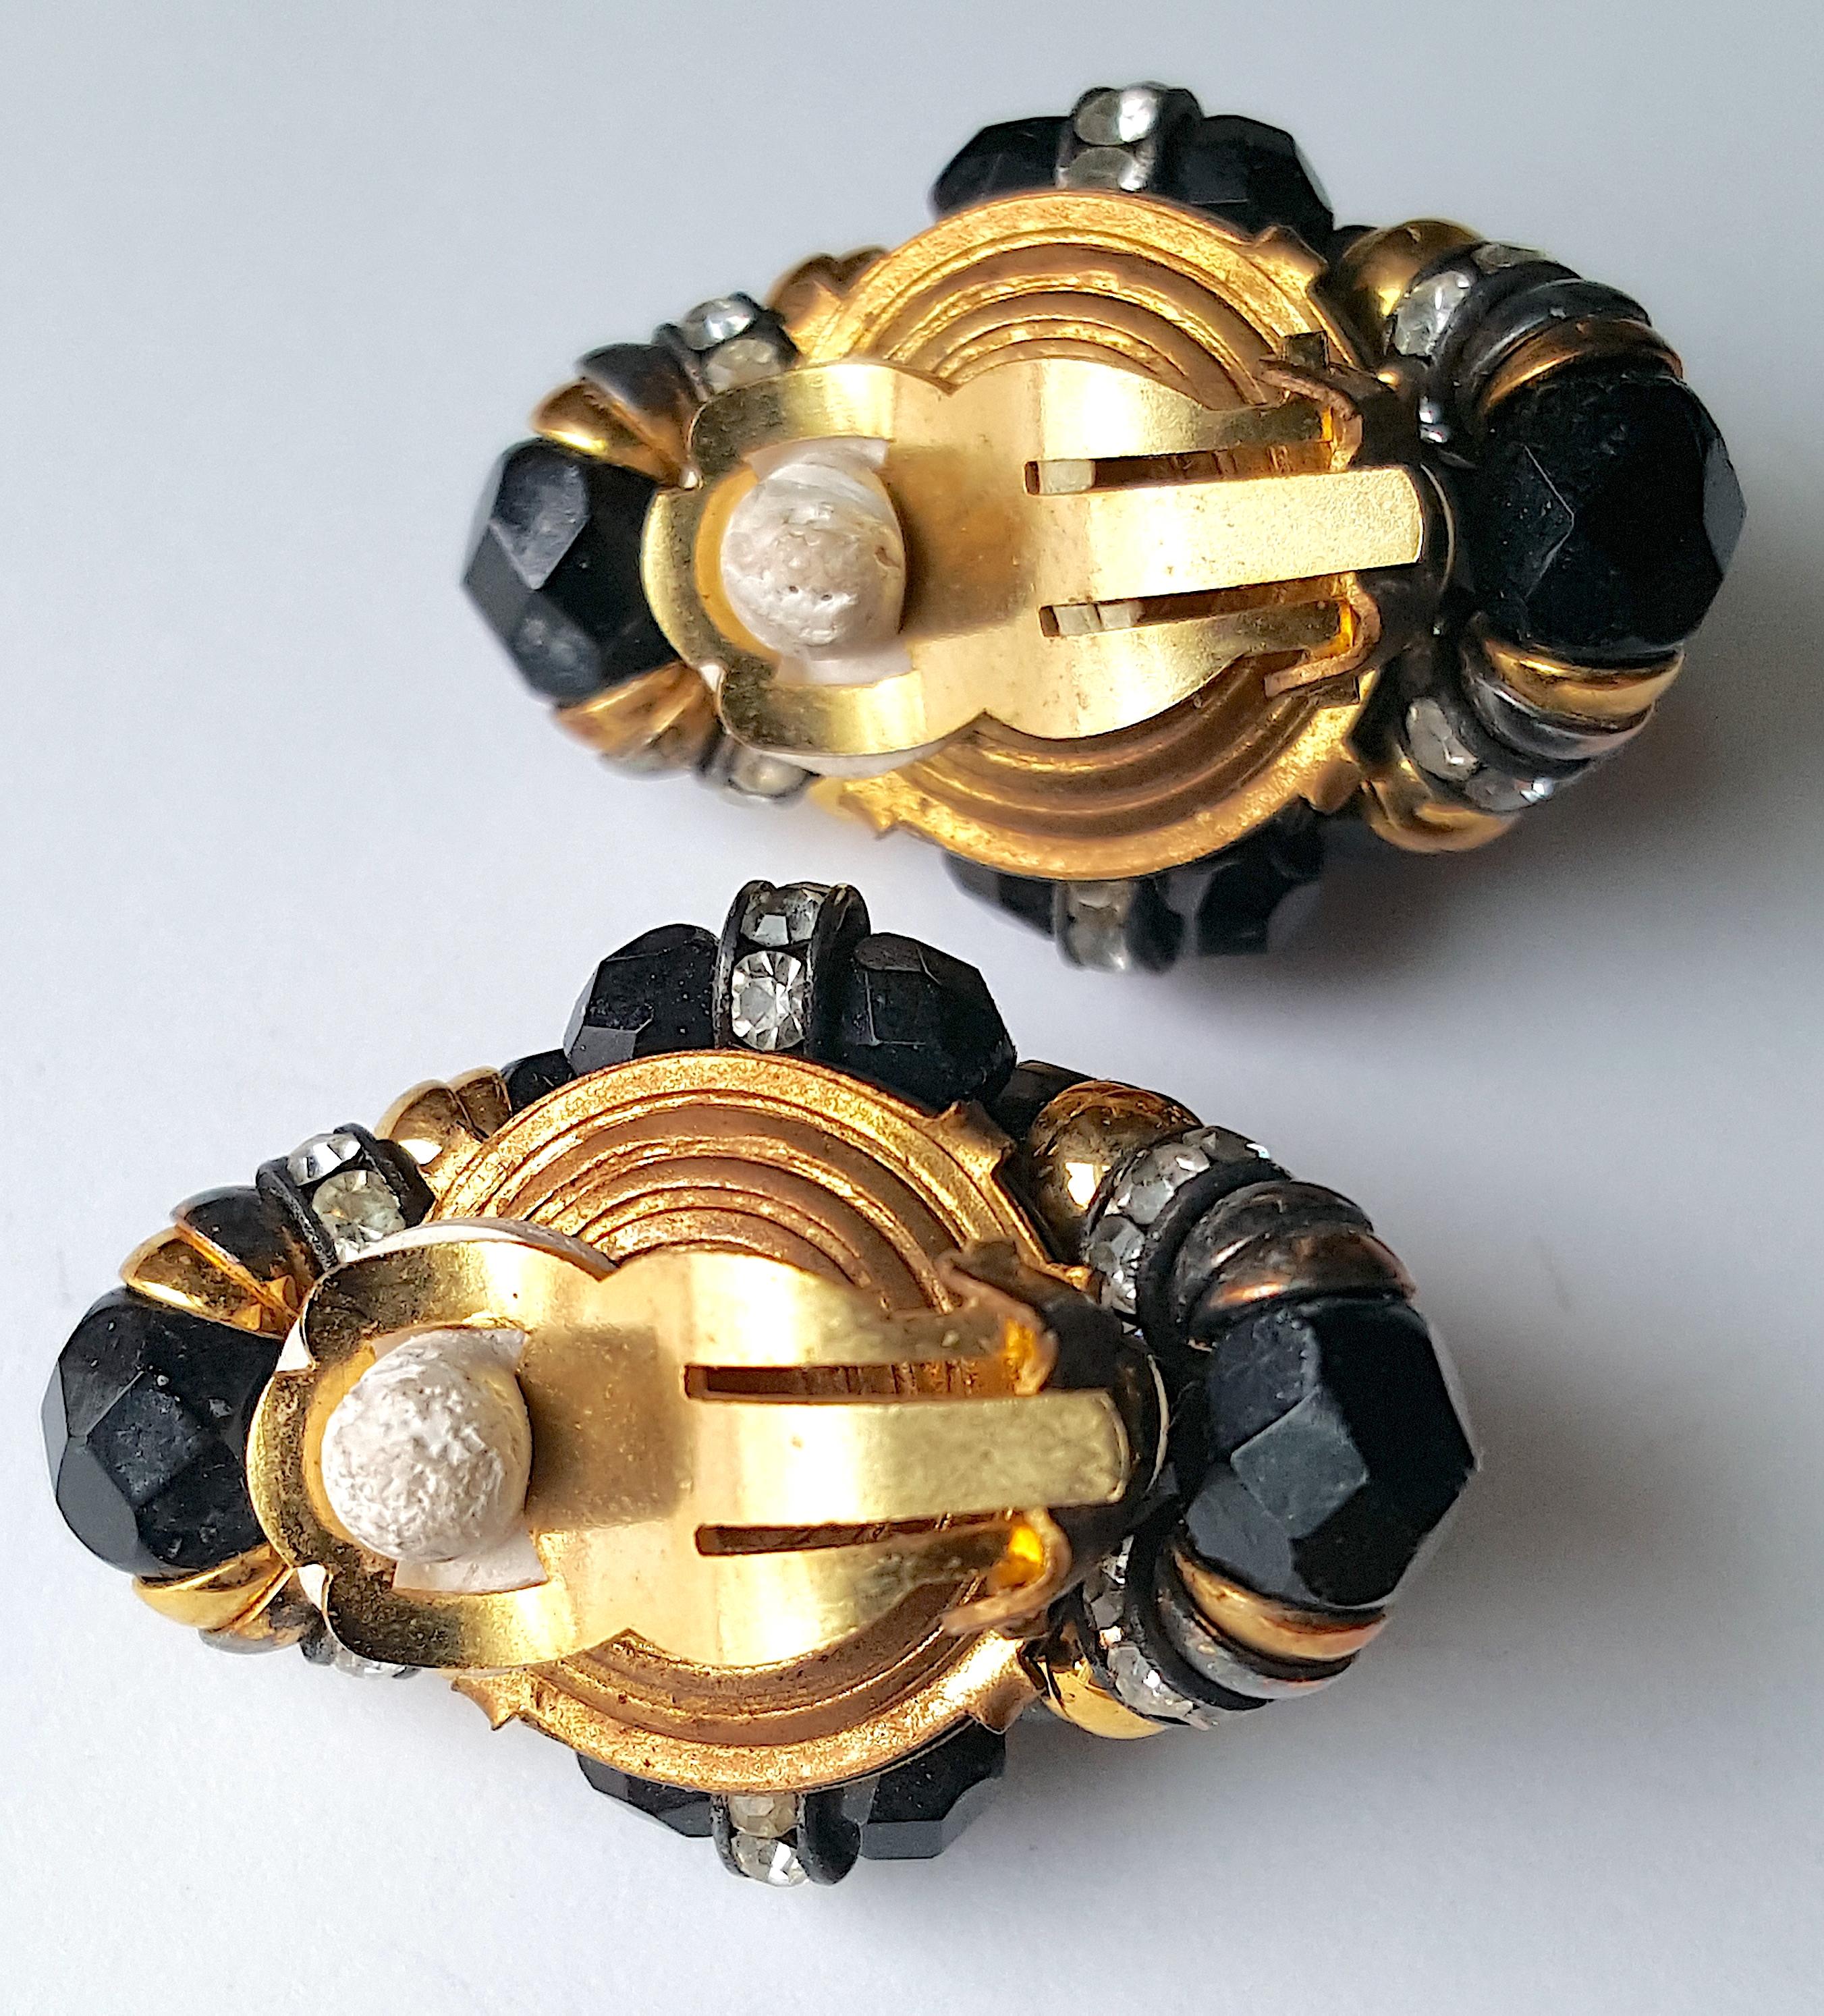 Couture Montague 1950s French WiredGlassBeads CrystalEnameledRondelles Earrings For Sale 3